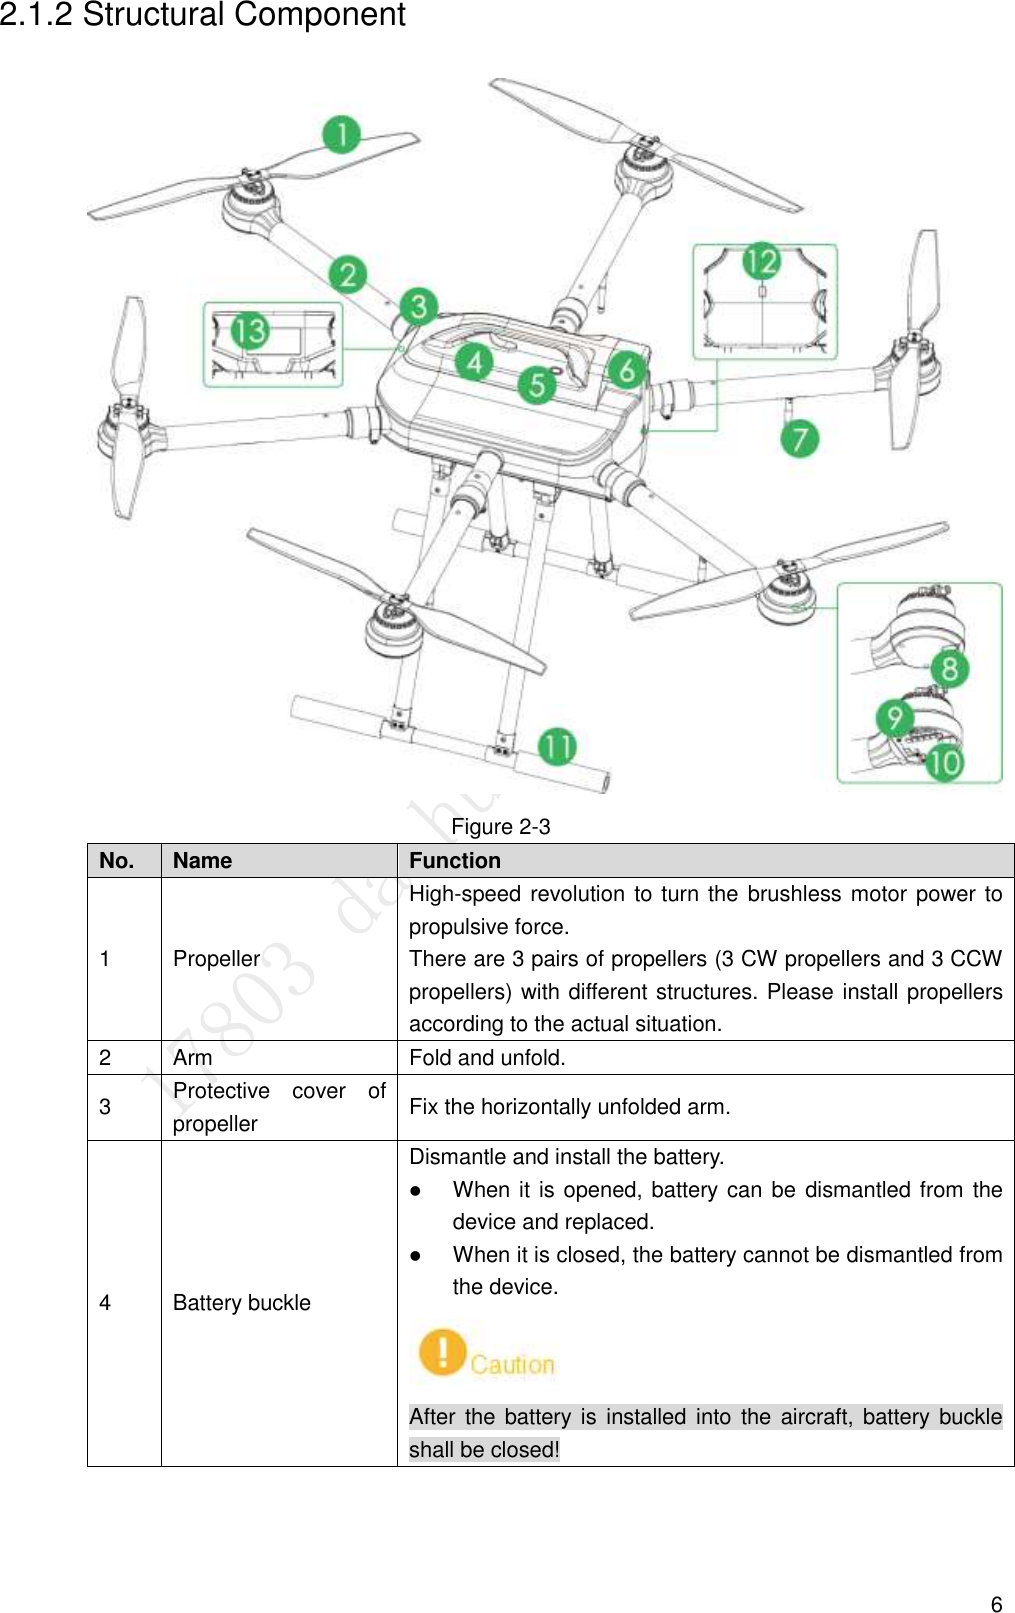  6 2.1.2 Structural Component  Figure 2-3 No. Name Function   1 Propeller High-speed revolution to turn the brushless motor power to propulsive force.   There are 3 pairs of propellers (3 CW propellers and 3 CCW propellers) with different structures. Please install propellers according to the actual situation. 2 Arm Fold and unfold. 3 Protective  cover  of propeller Fix the horizontally unfolded arm. 4 Battery buckle Dismantle and install the battery.  When it is opened, battery can be dismantled from the device and replaced.  When it is closed, the battery cannot be dismantled from the device.  After the battery is installed into the aircraft, battery buckle shall be closed! 